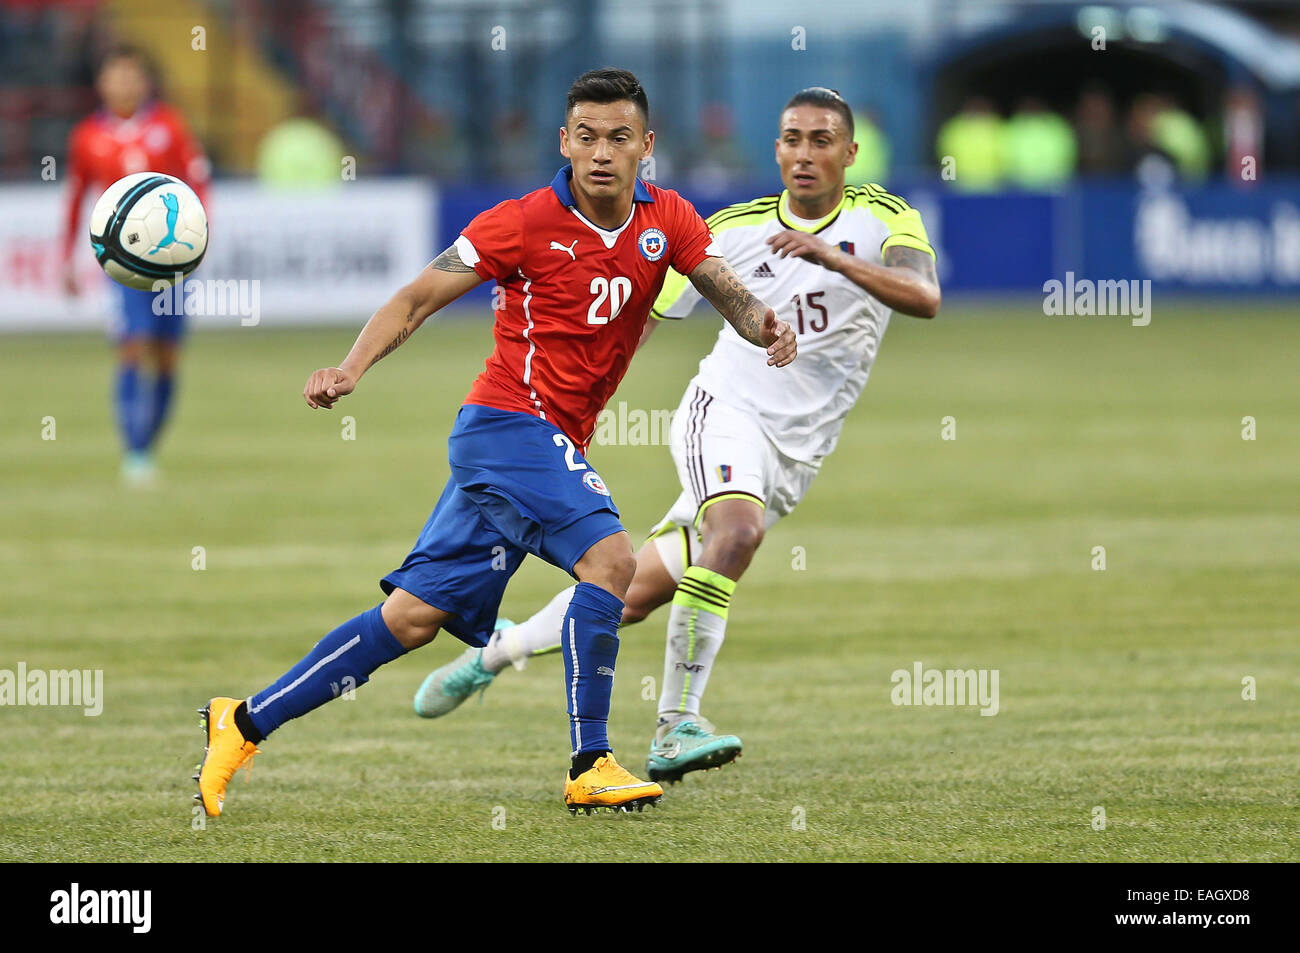 Talcahuano, Chile. 14th Nov, 2014. Image provided by the National Asociation of Professional Soccer shows Chile's Charles Aranguiz (L) vying with Venezuela's Rafael Acosta during a friendly match in Talcahuano, Chile, Nov. 14, 2014. © ANFP/Xinhua/Alamy Live News Stock Photo